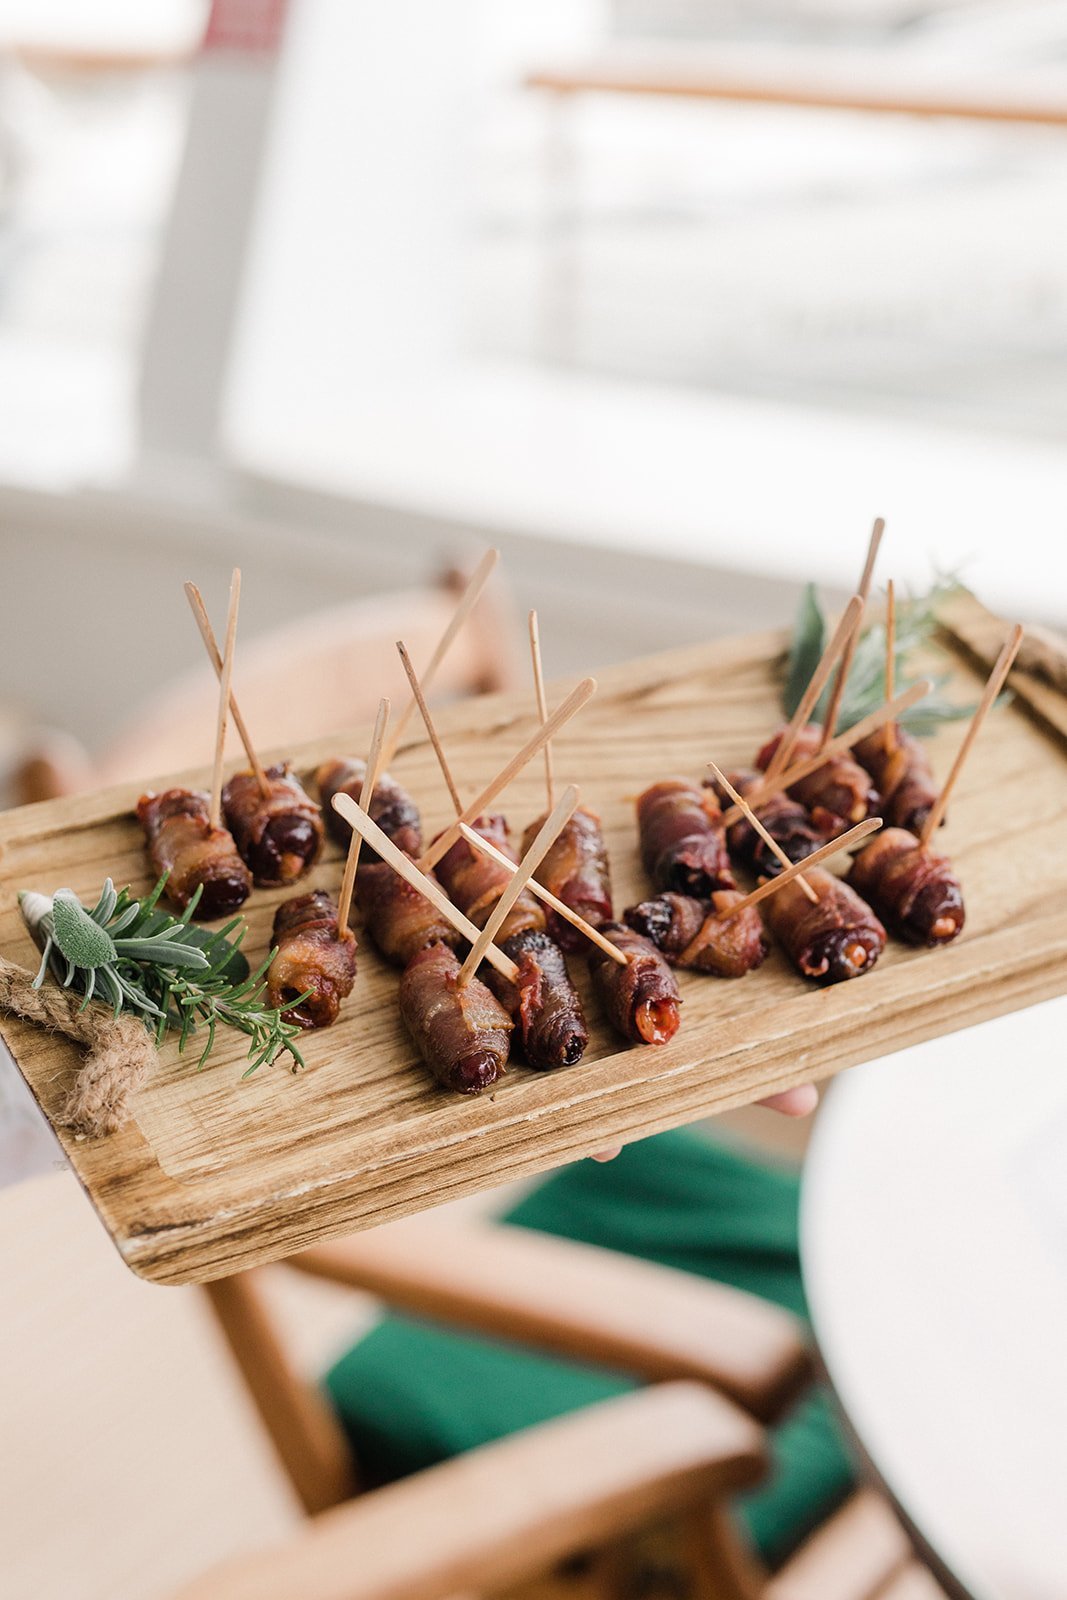 www.santabarbarawedding.com | Anna Delores Photography | Channel Cat Charters | Onyx + Redwood | Catering Connection | Bacon Wrapped Dates Appetizer